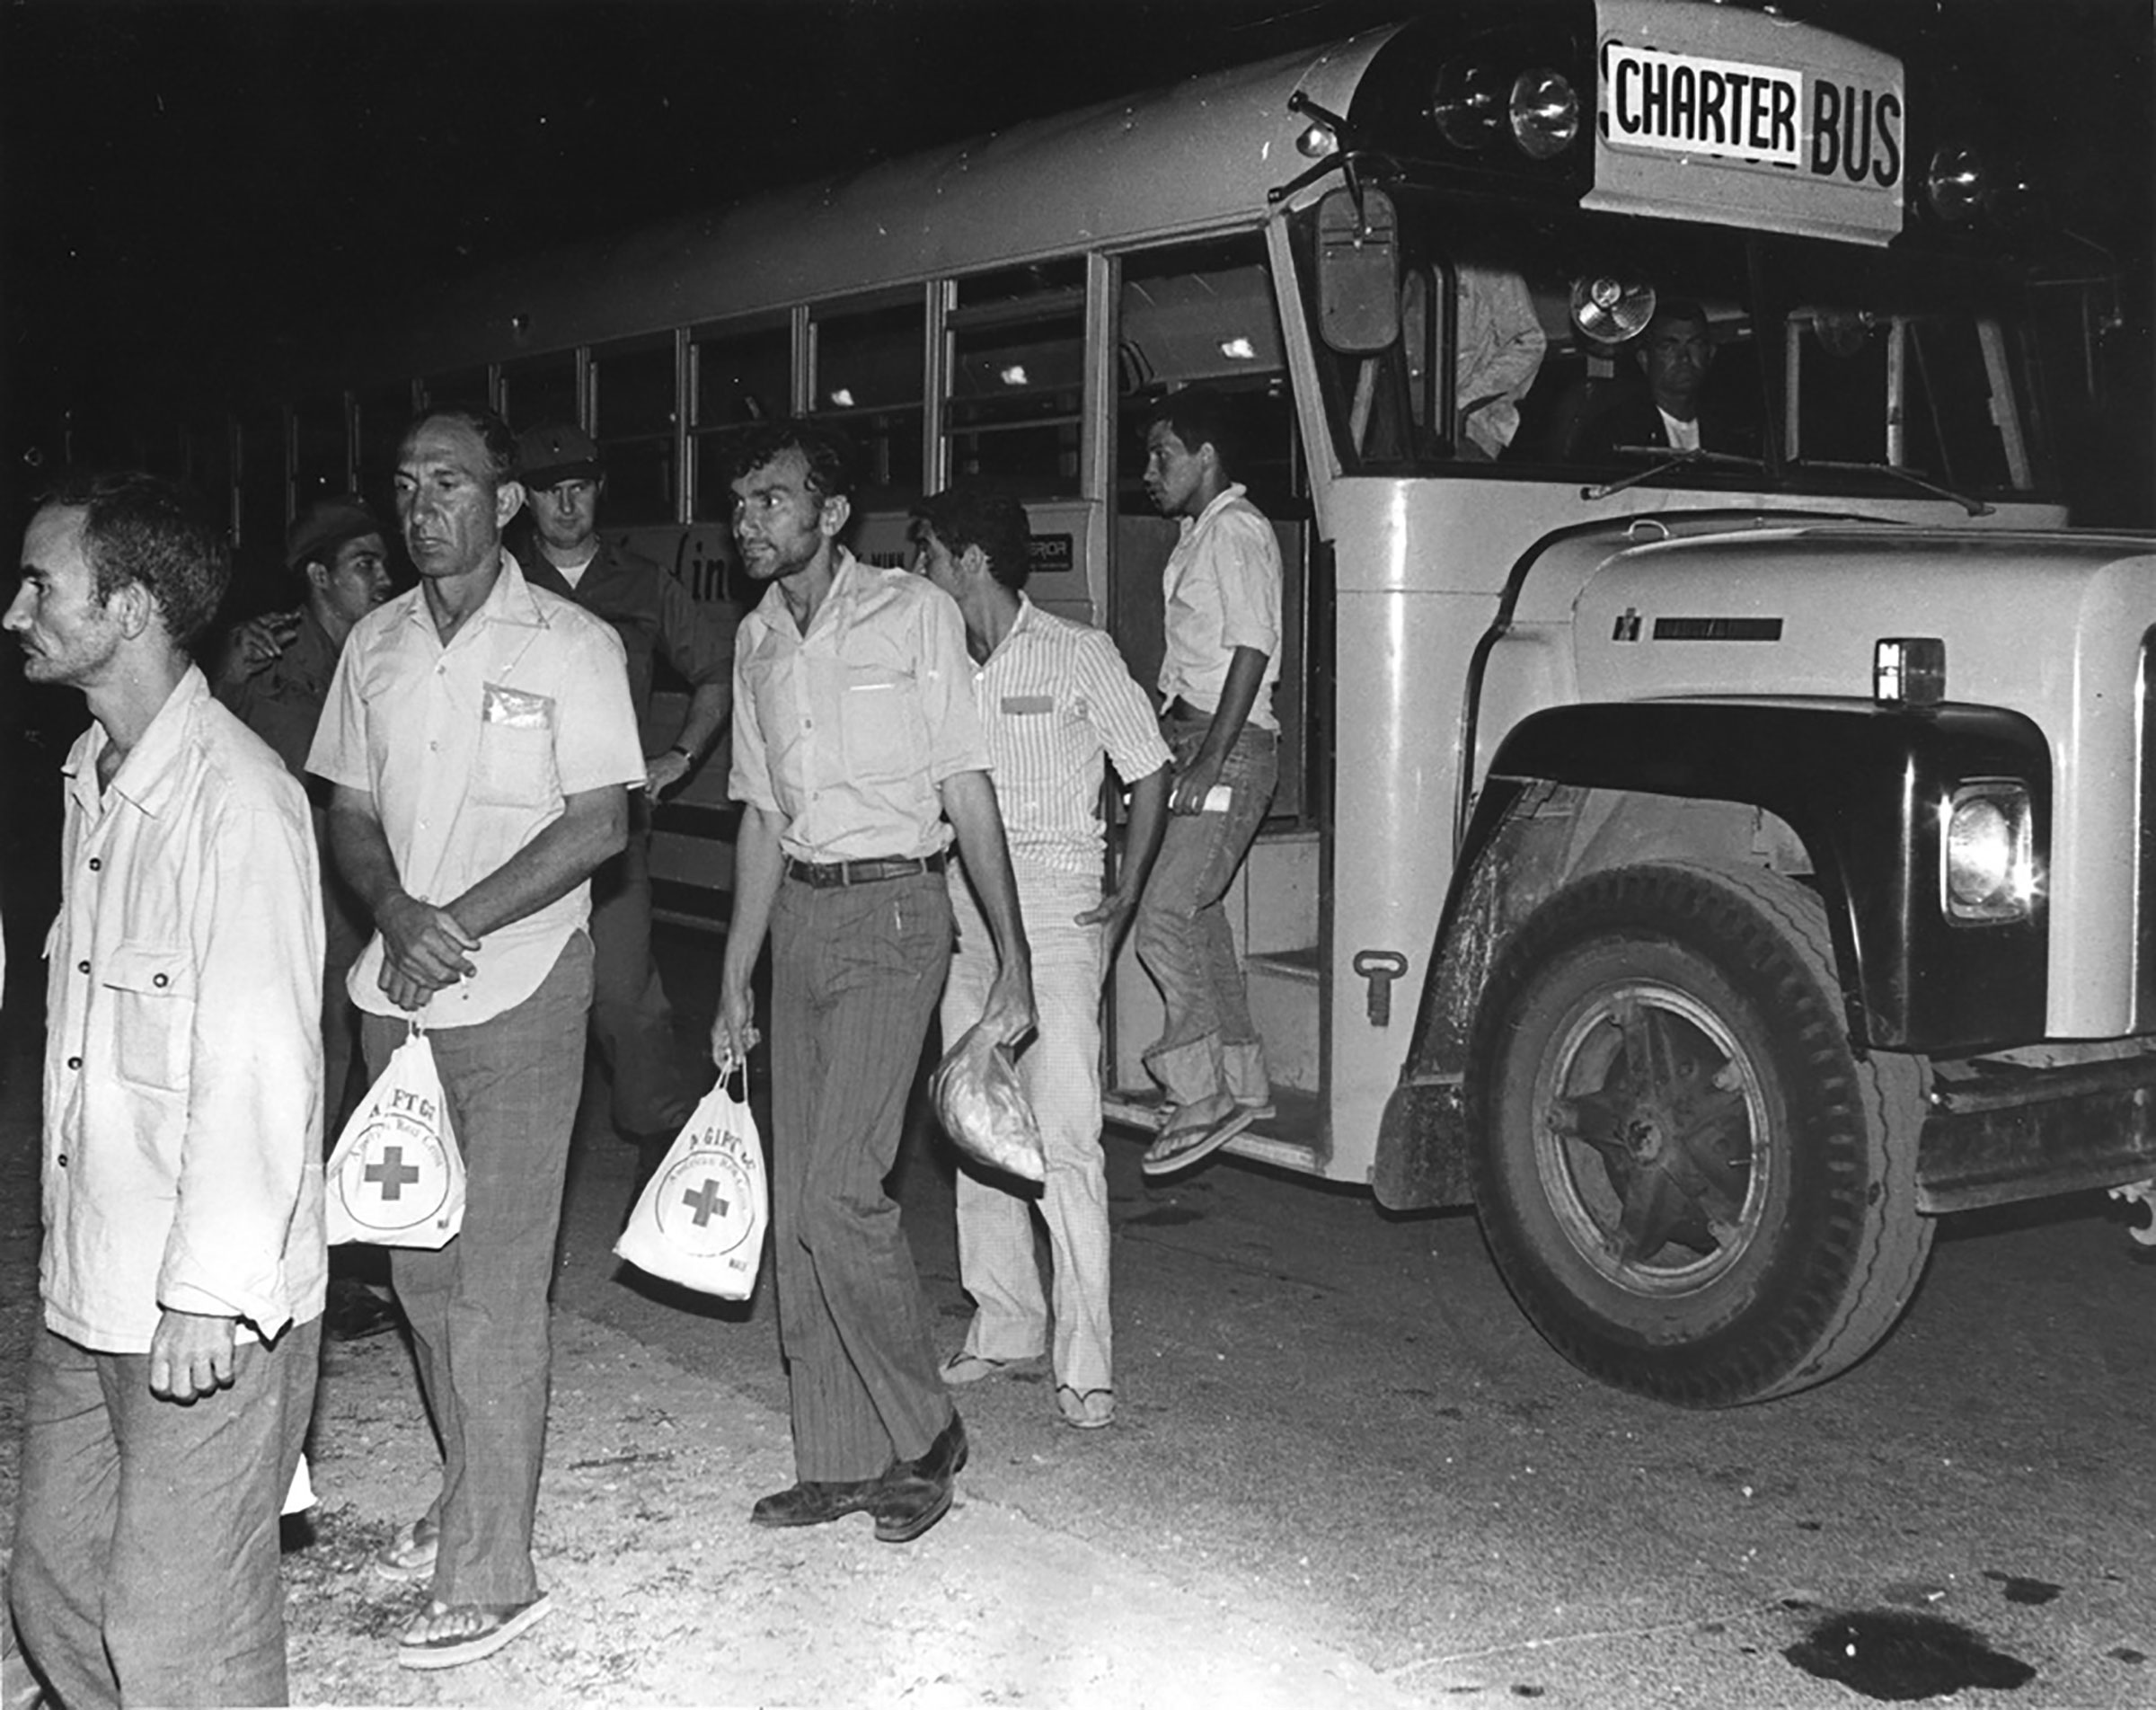 Cuban refugees step off a bus and into a holding area at Fort McCoy in 1980 after a ride from the La Crosse Municipal Airport. Fort McCoy served as a processing center for Cuban refugees from the Mariel Boatlift. (Mary Bower—Courtesy U.S. Army)